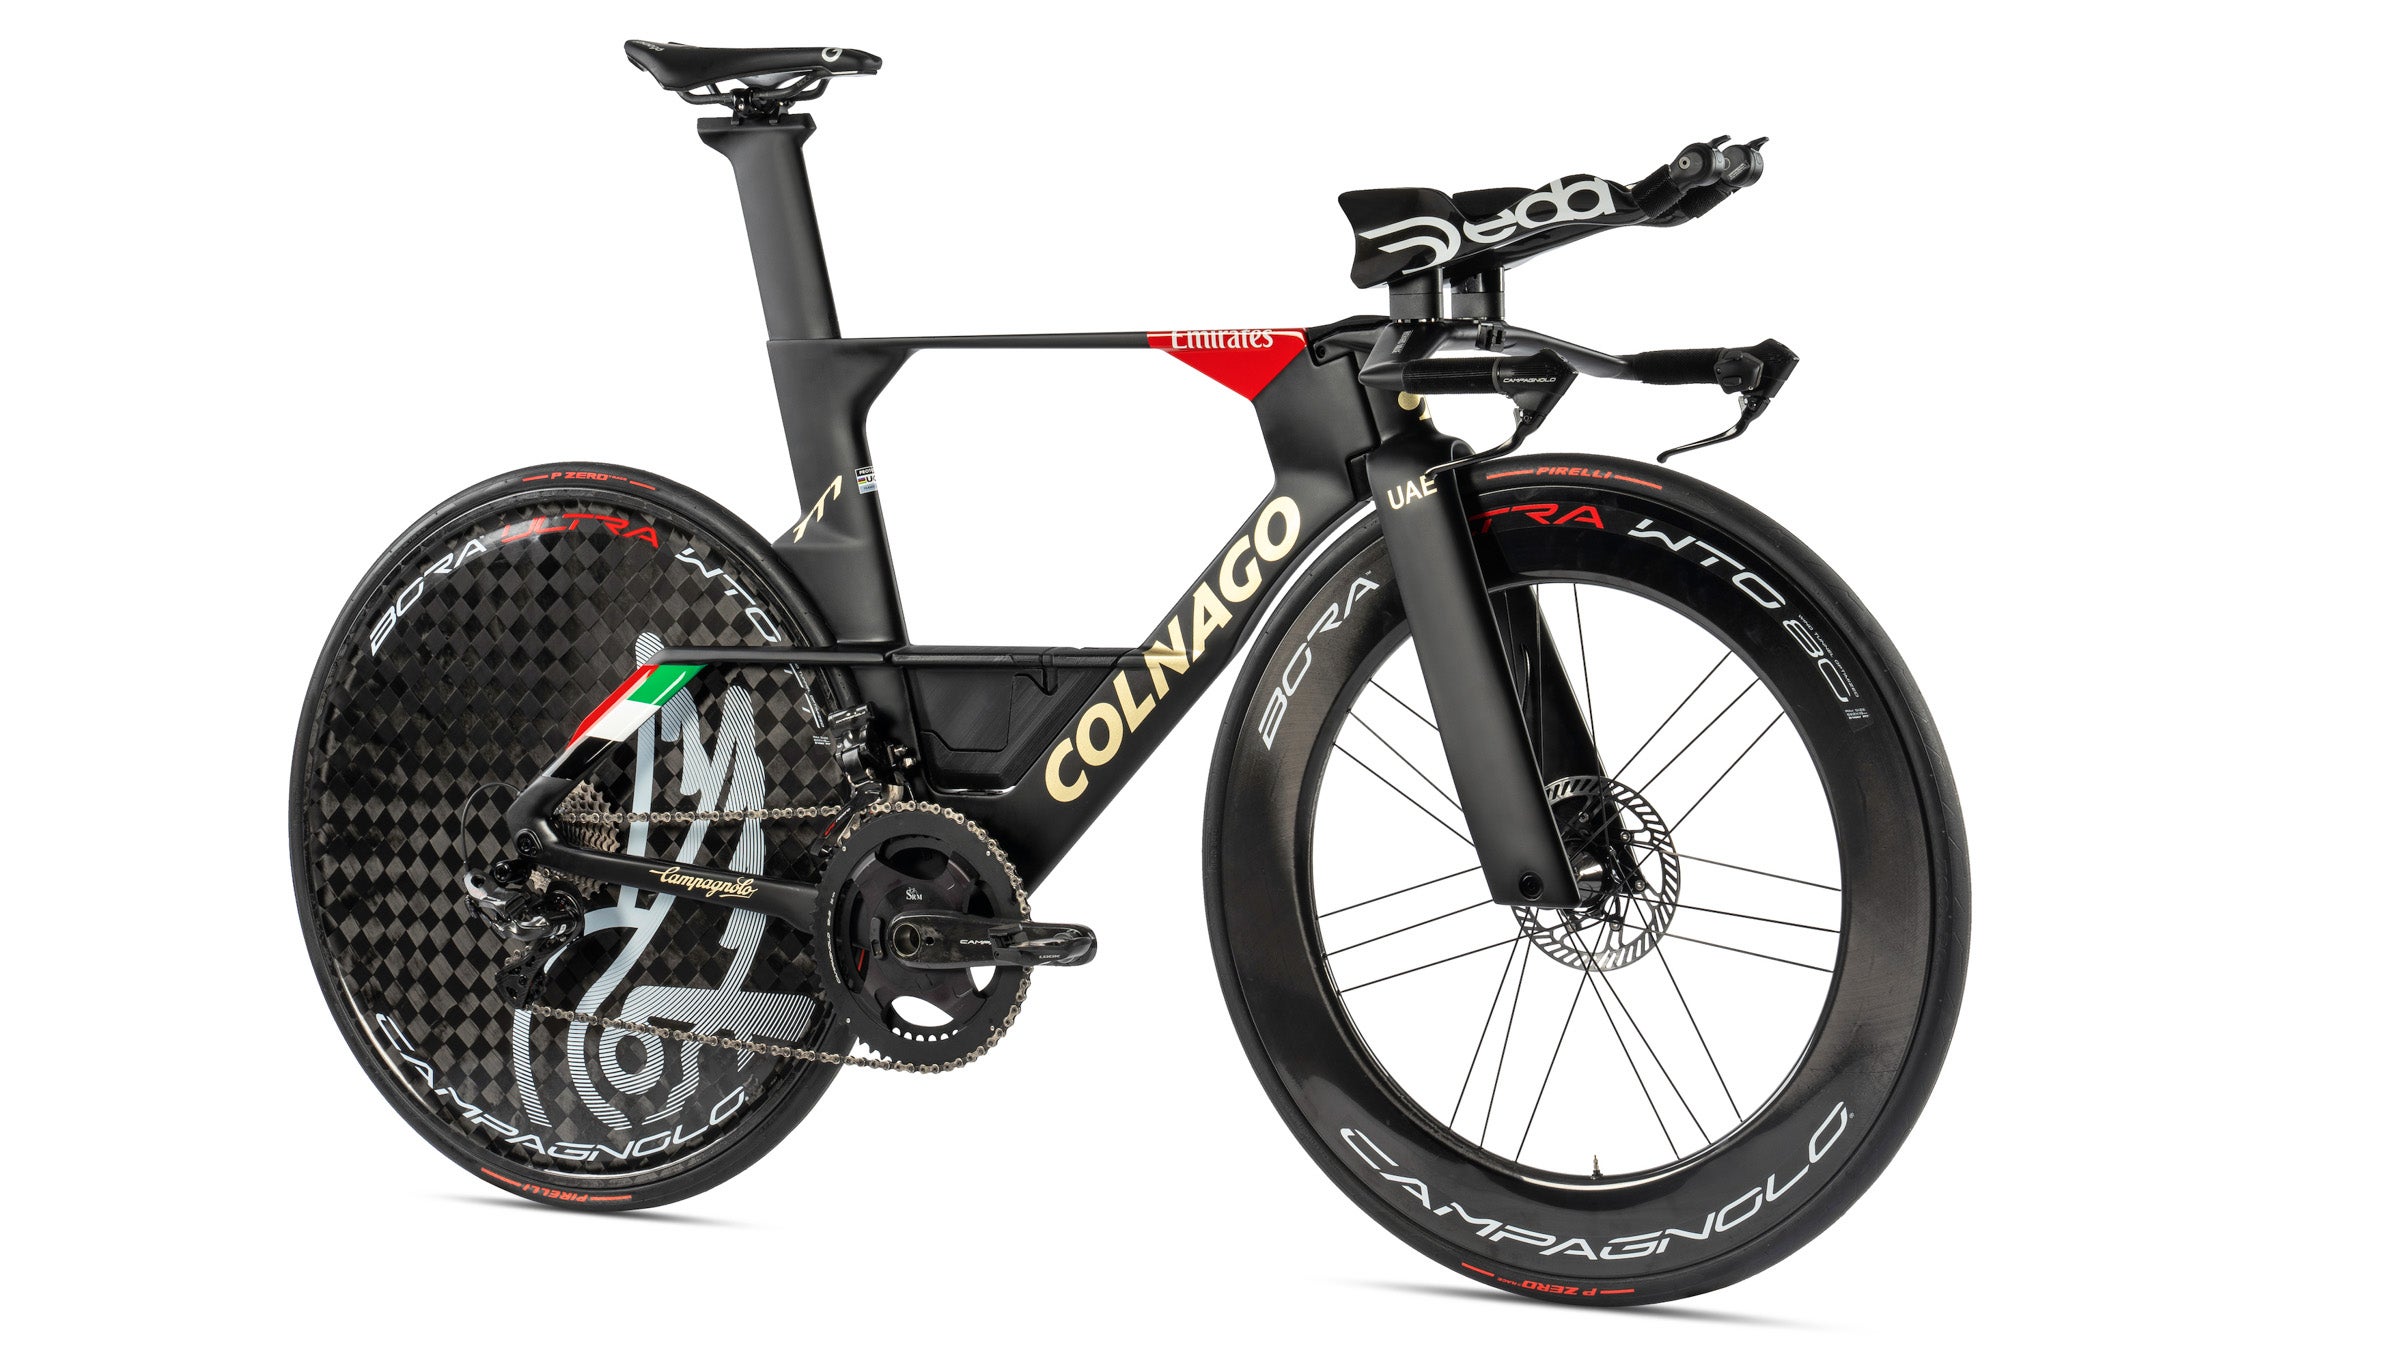 Gallery Colnagos latest TT1 prototype time trial bike unveiled ahead of the Giro dItalia